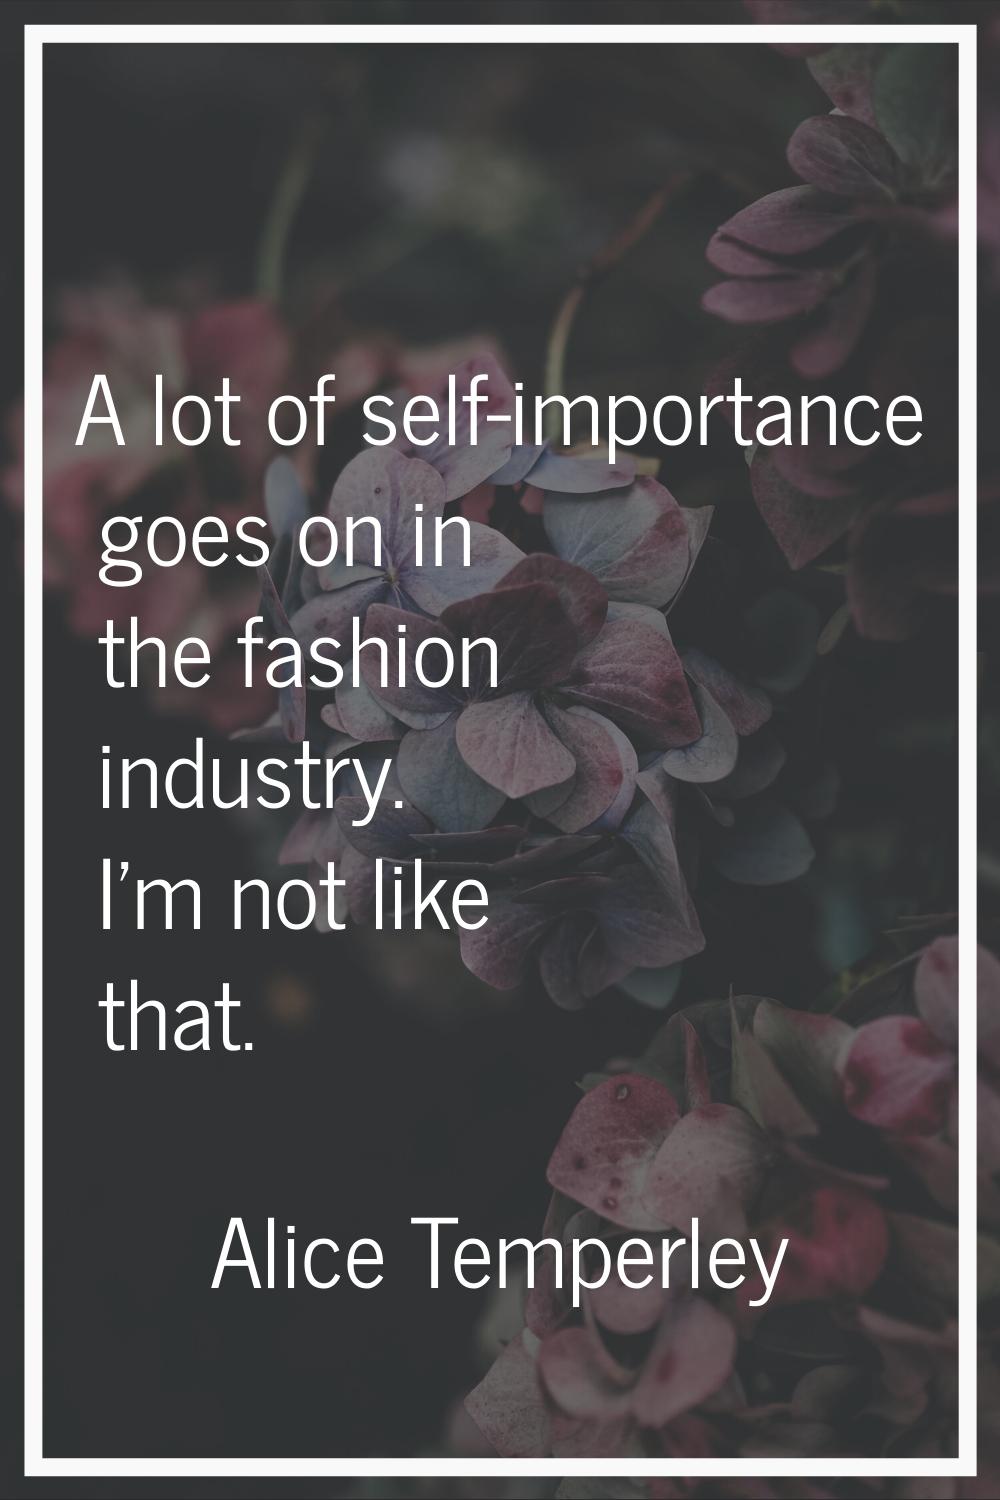 A lot of self-importance goes on in the fashion industry. I'm not like that.